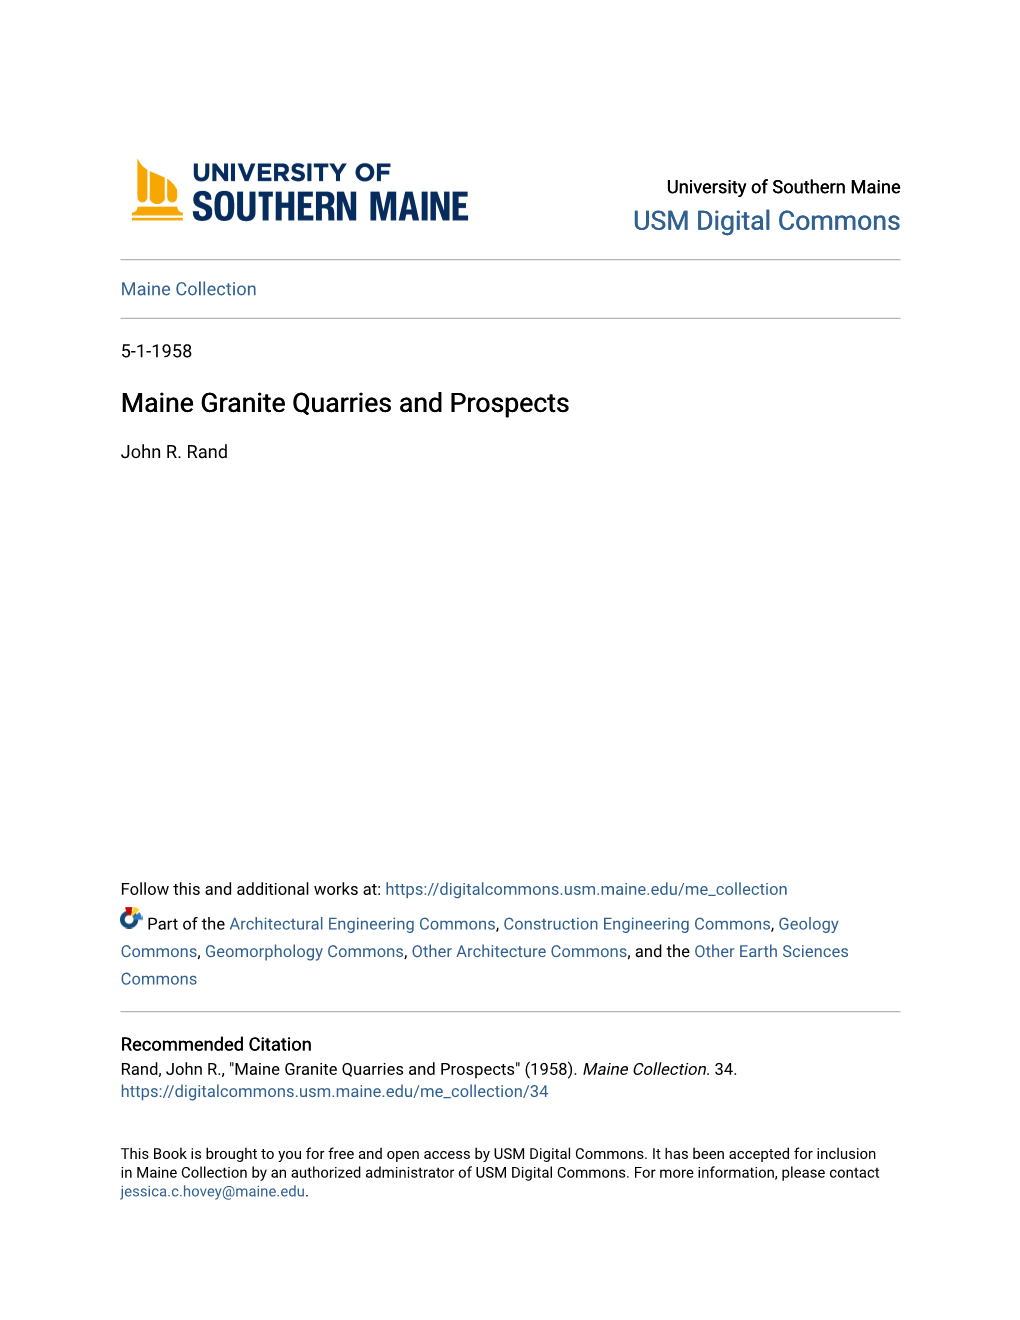 Maine Granite Quarries and Prospects